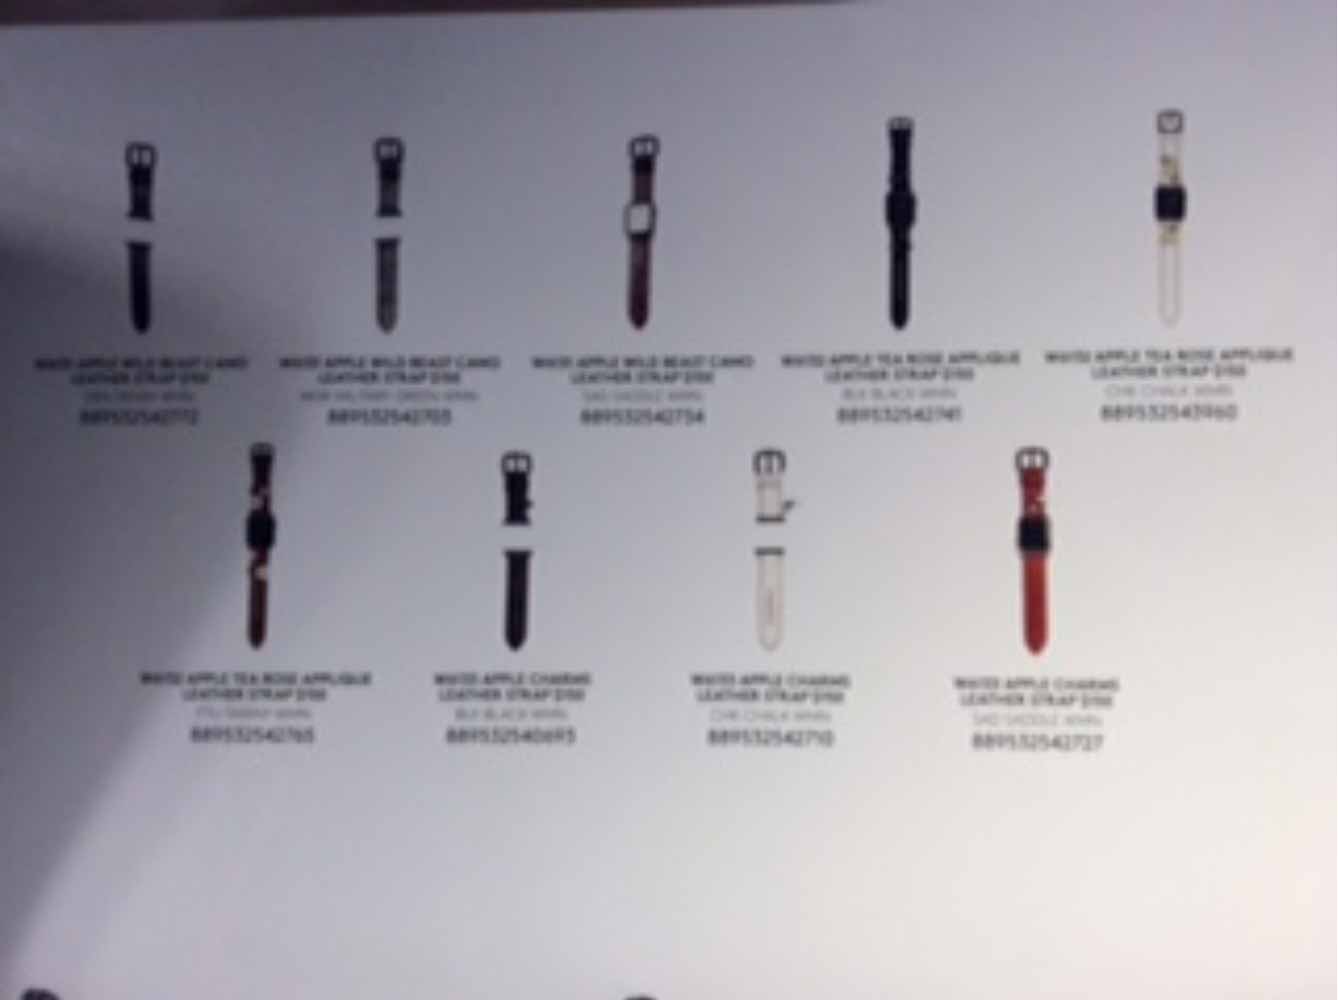 CoachのApple Watch用バンドの新たな画像がリークか!?